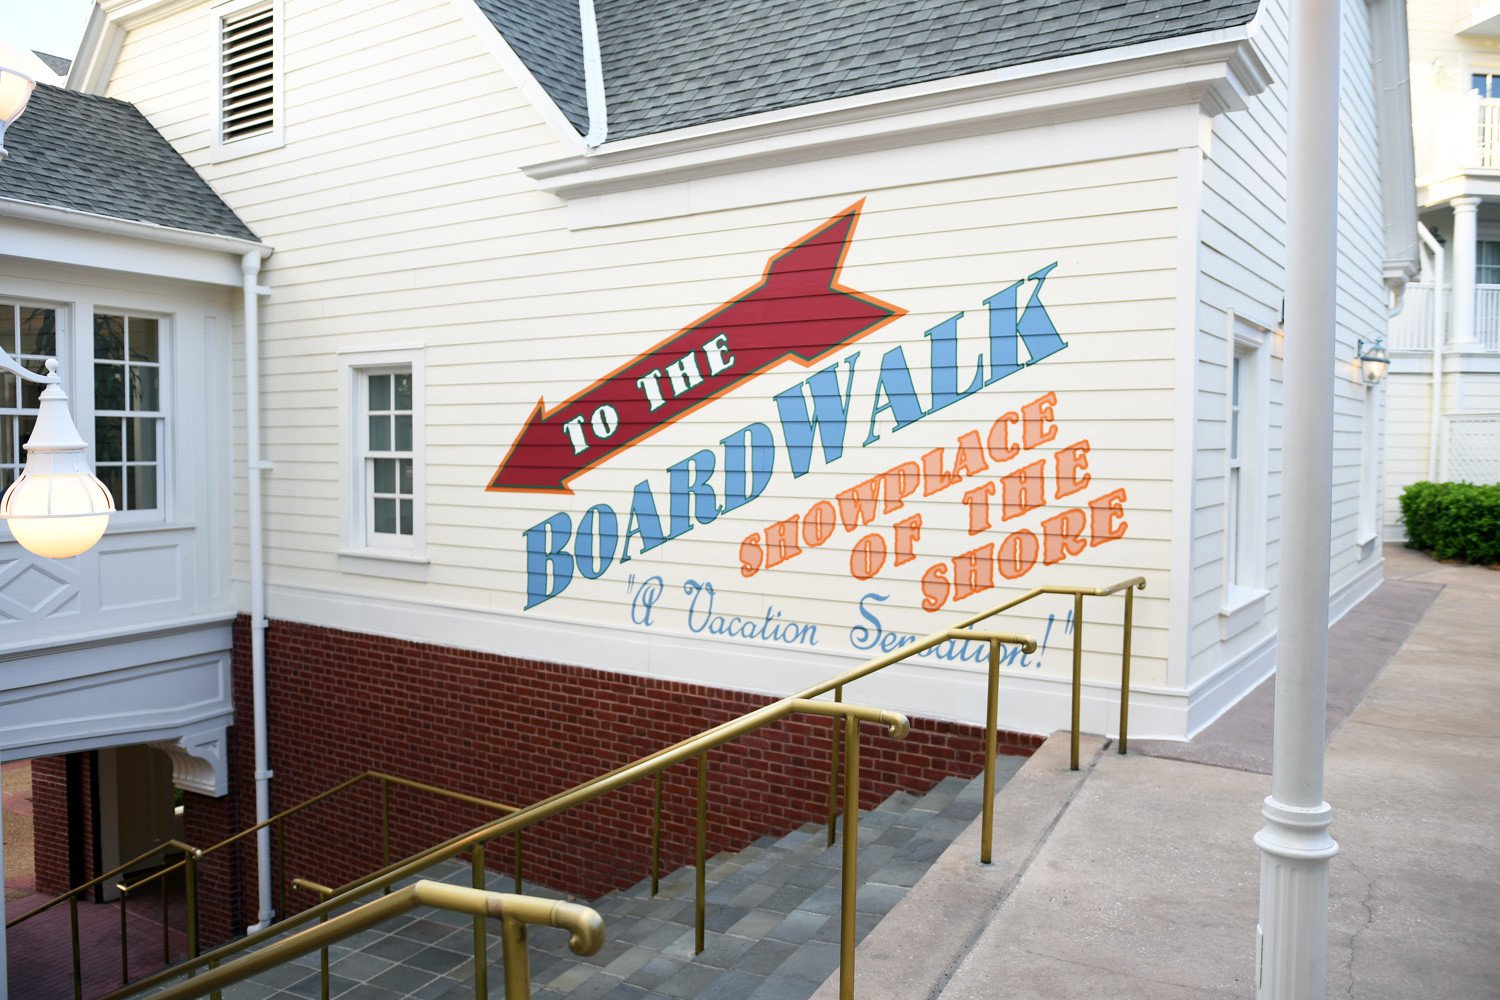 To the boardwalk